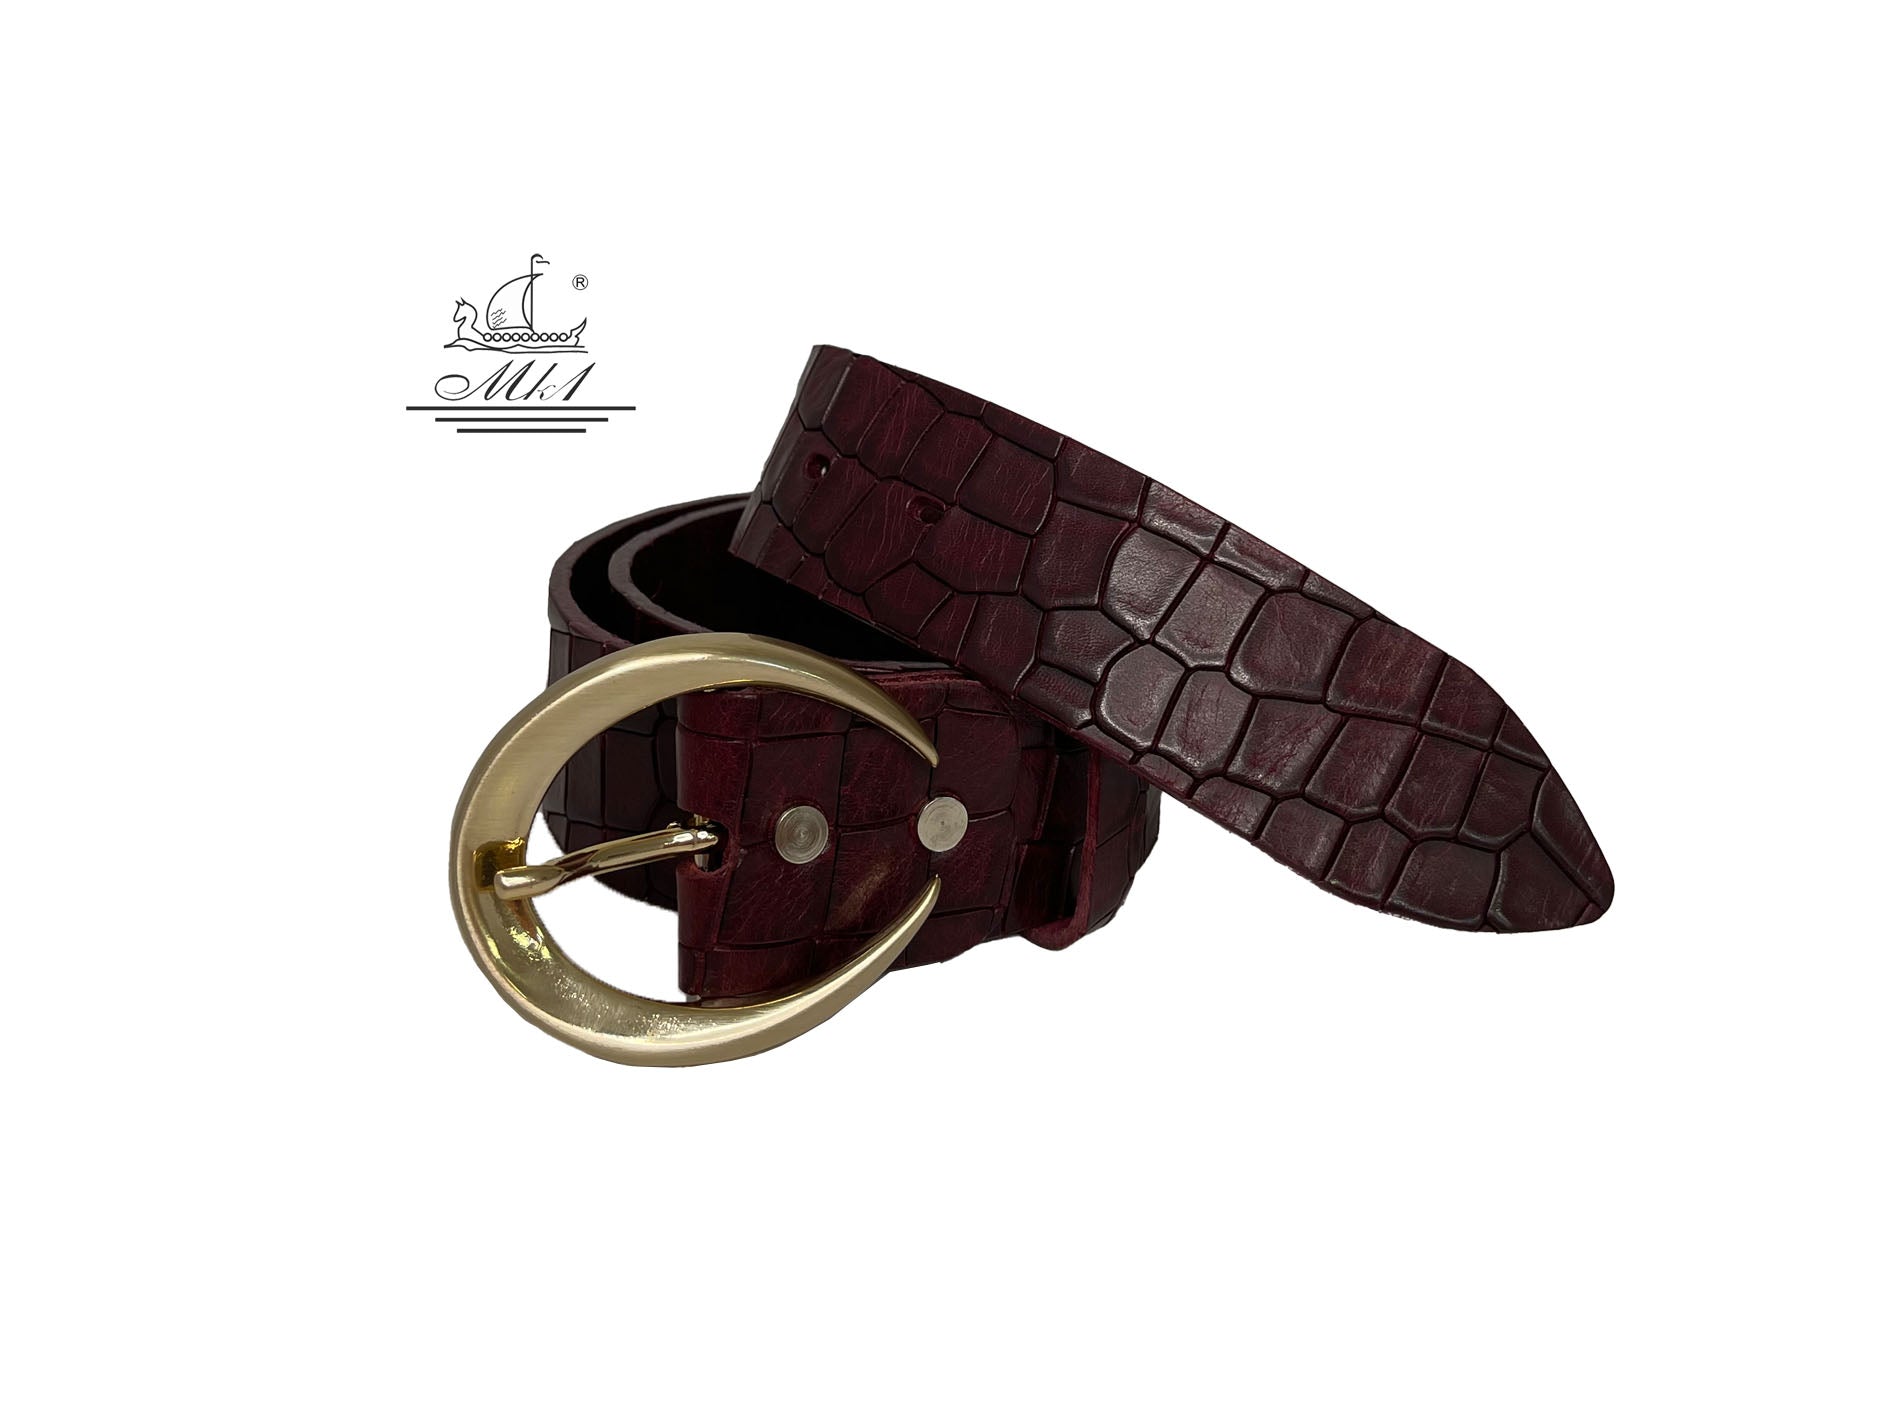 Unisex 4cm wide belt handcrafted from burgundy leather with croco design. 101589/40BG/KR